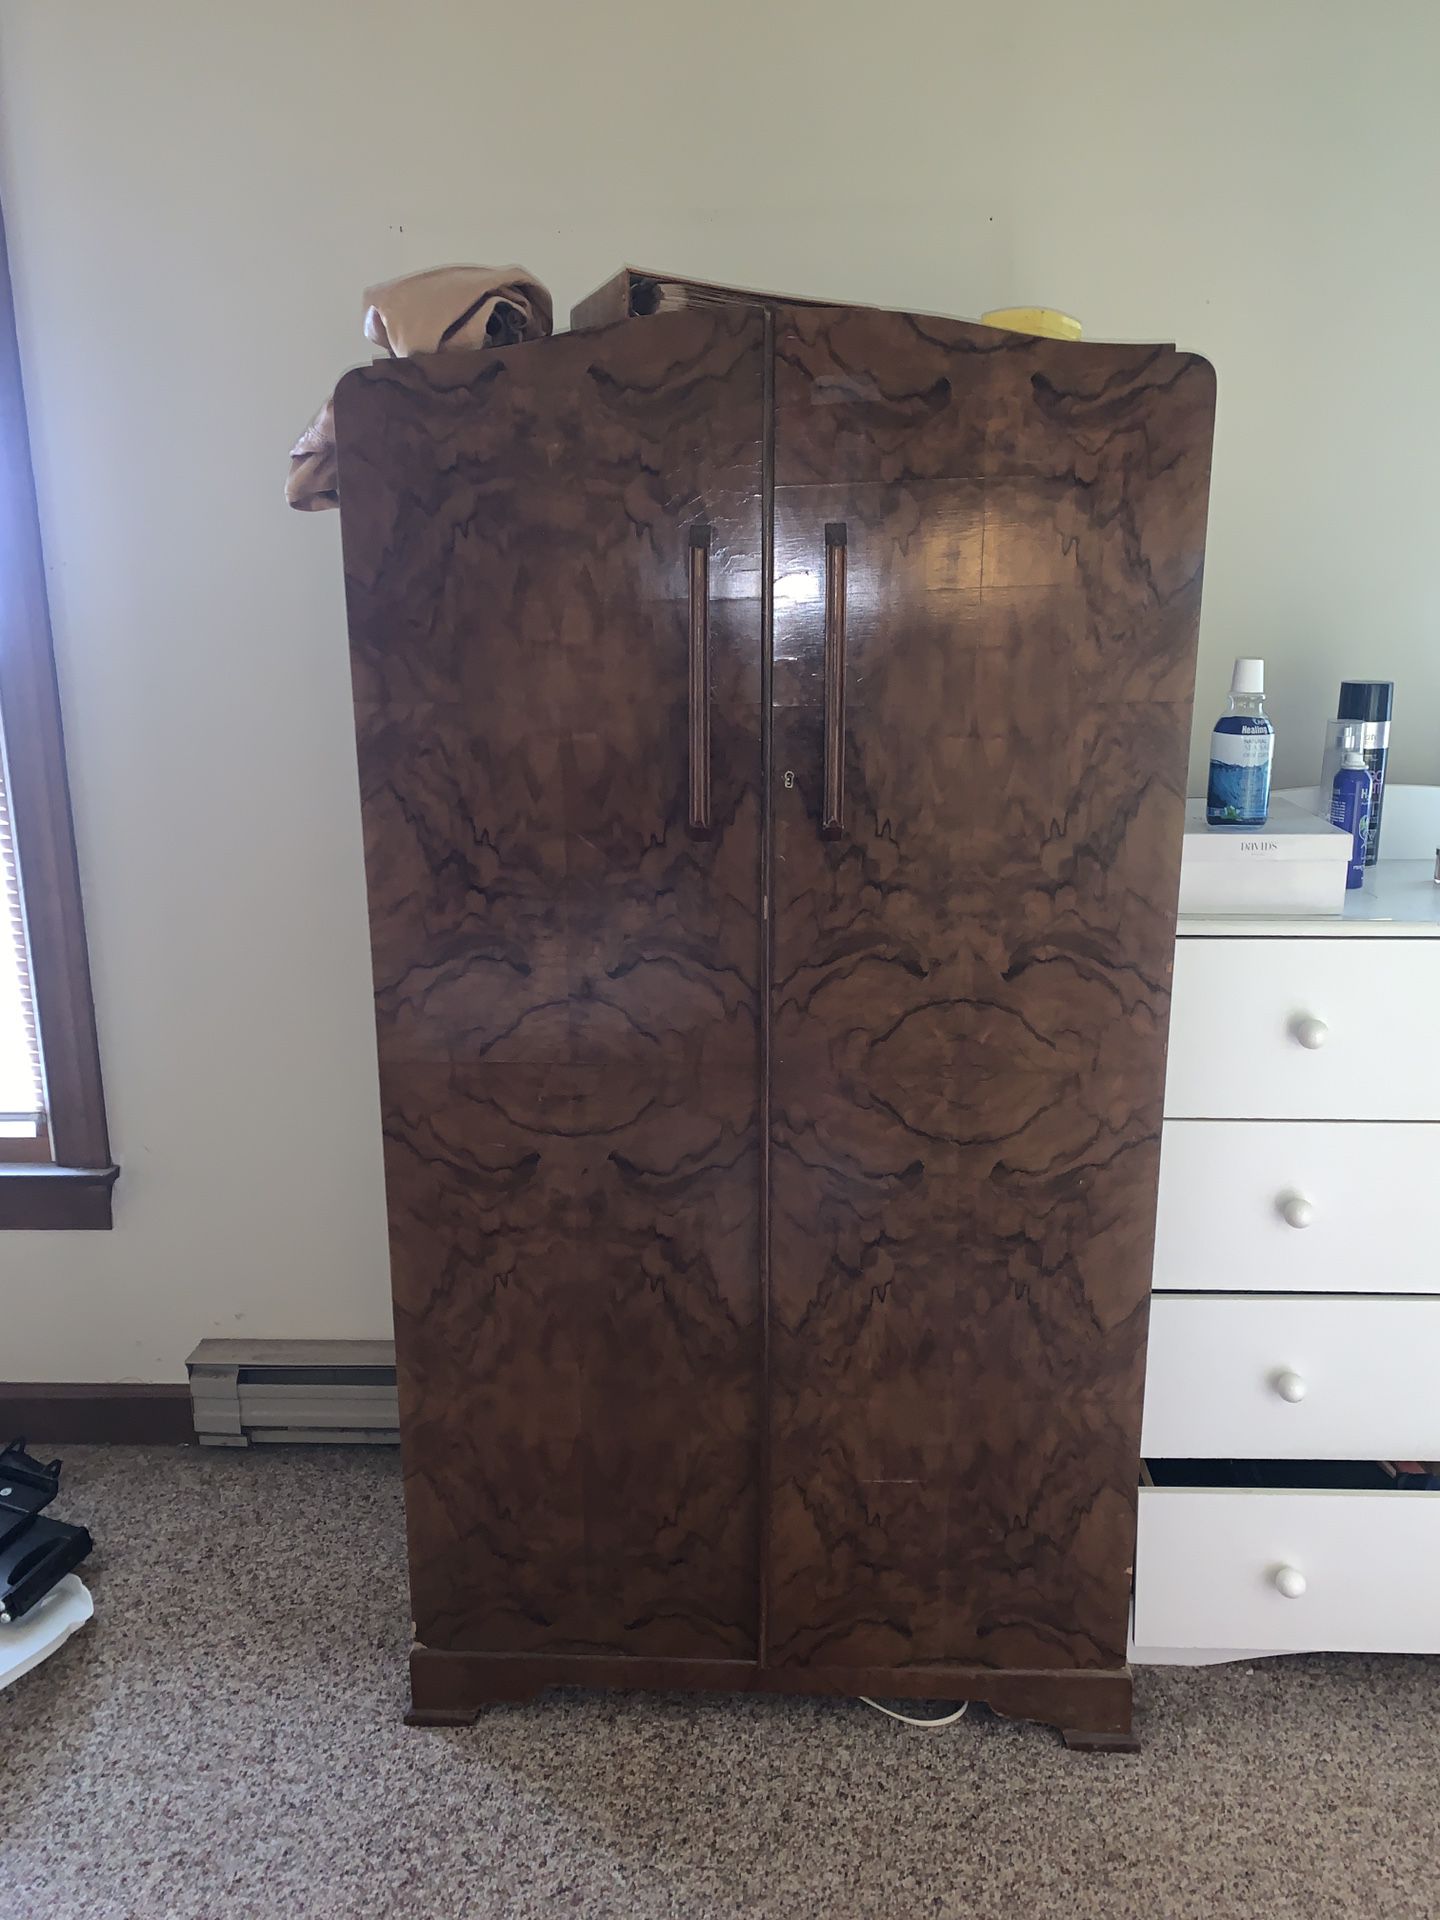 Antique Armoire It’s 34” wide and 64” wide